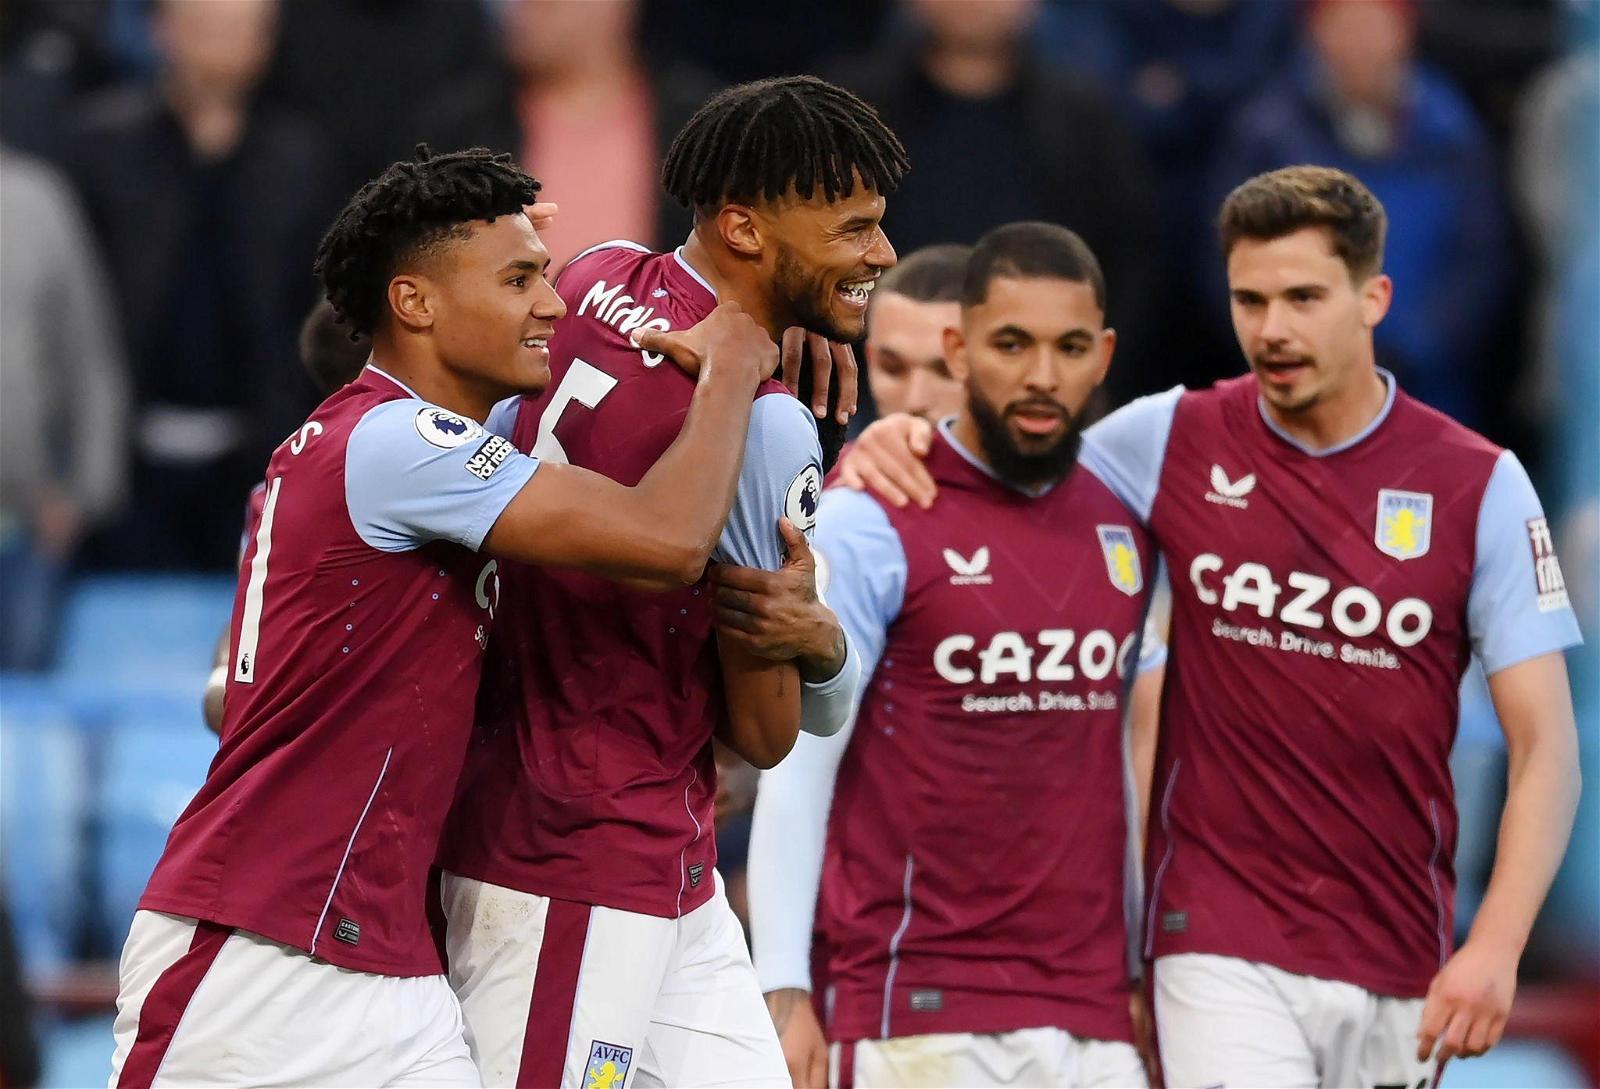 Aston Villa move up to fifth after 1-0 win over Fulham - Vanguard News